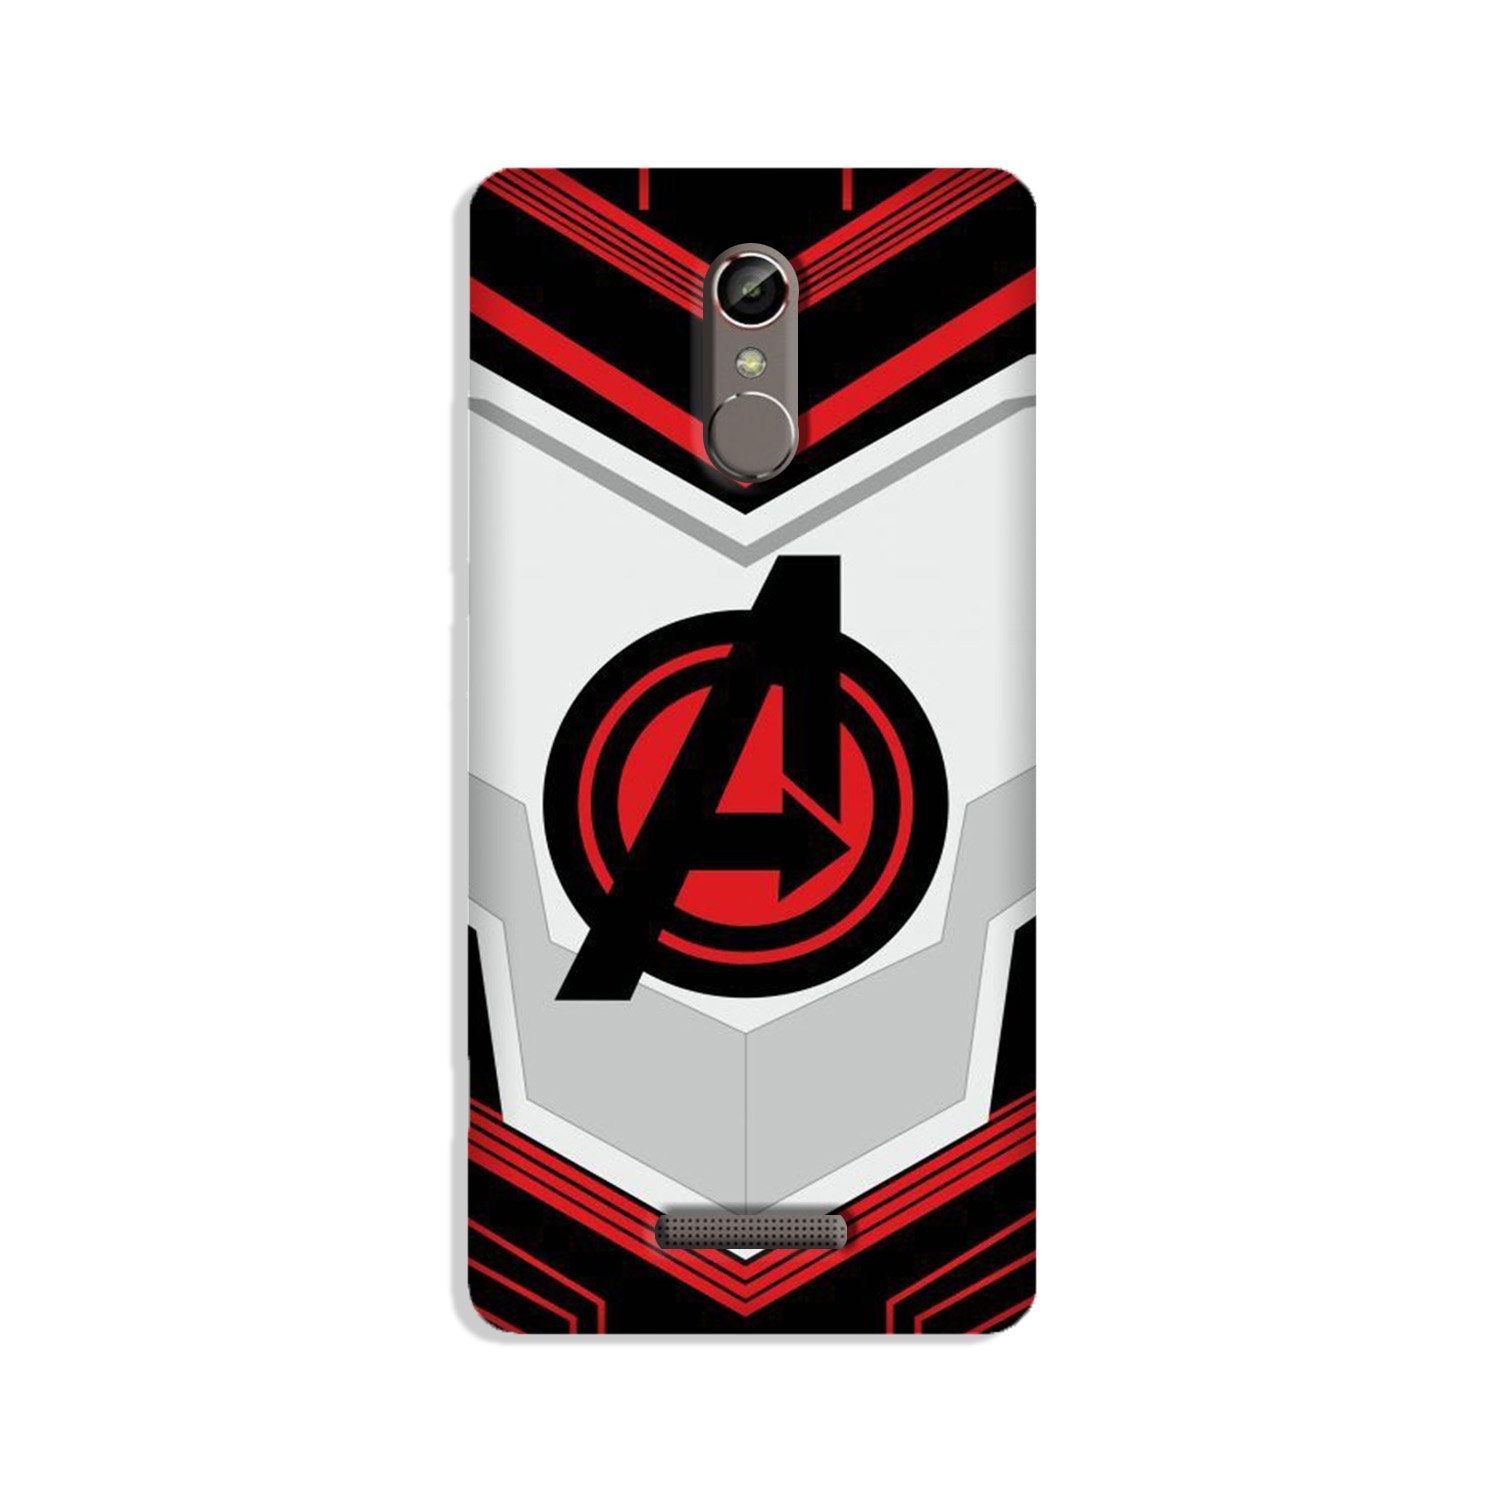 Avengers2 Case for Gionee S6s (Design No. 255)